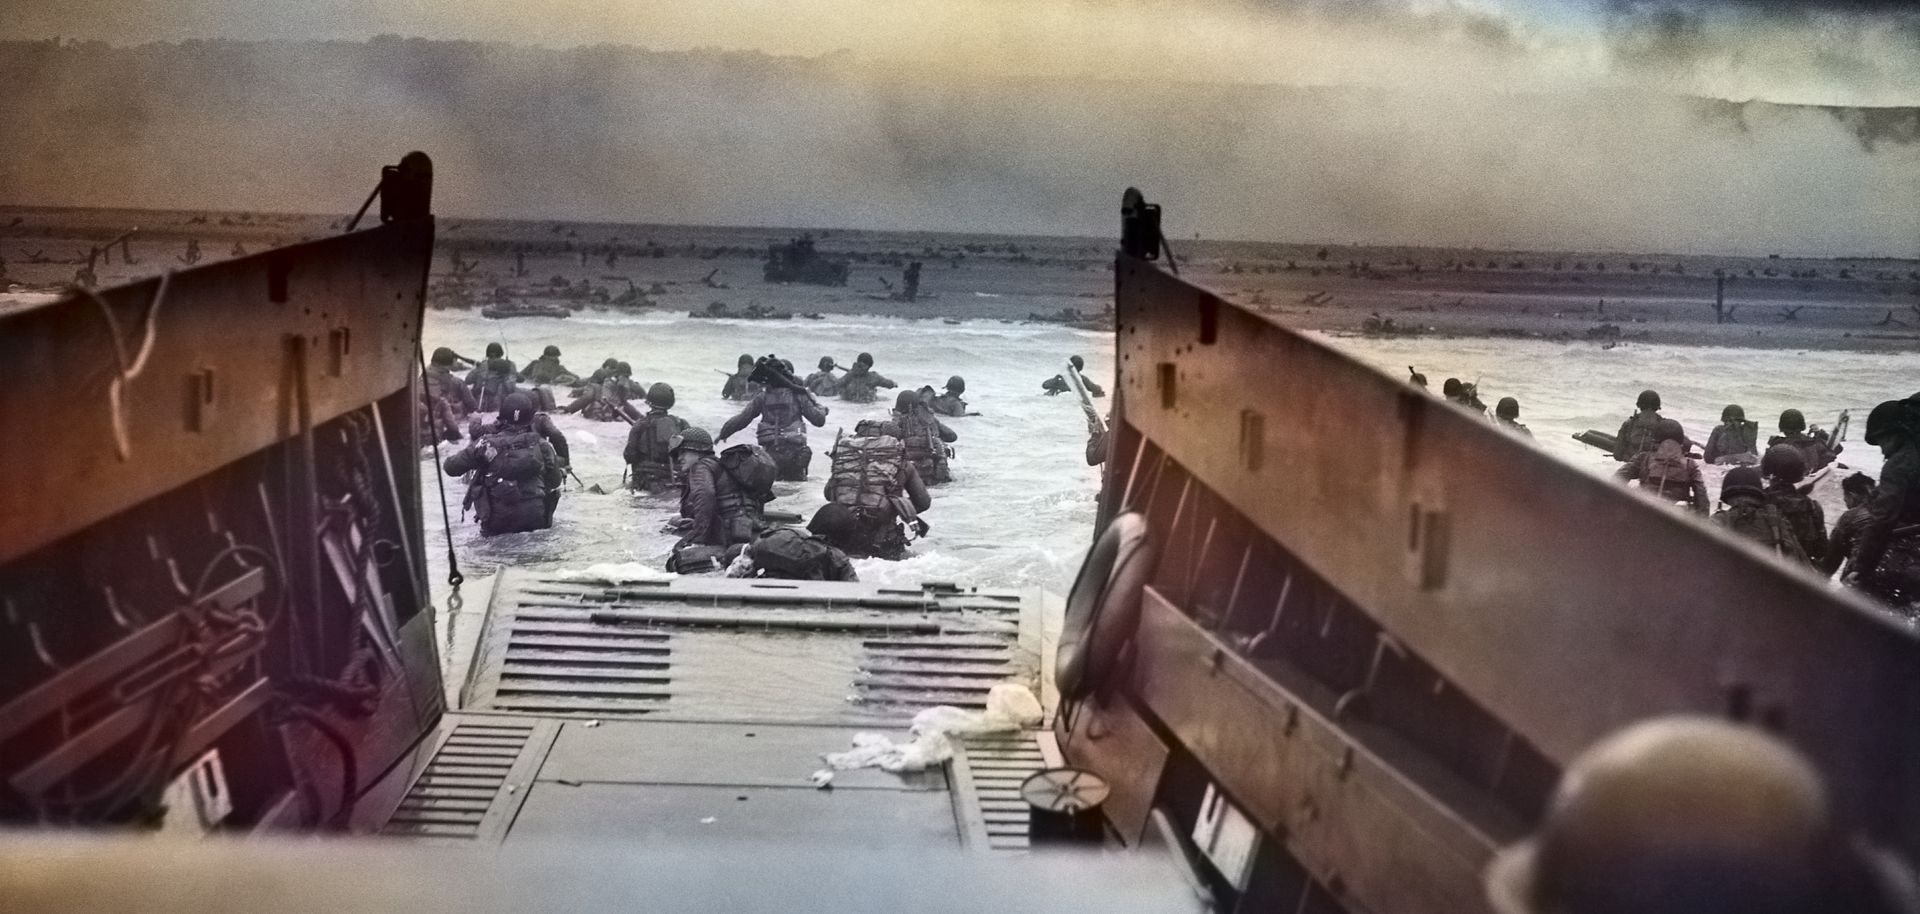 A digitally colorized image of a photograph by Robert F. Sargent titled "Into the Jaws of Death." Sargent captured troops from the United States Army First Infantry Division disembarking from an LCVP (landing craft) onto Omaha Beach during the Normandy Landings on D-Day during World War II, June 6, 1944.